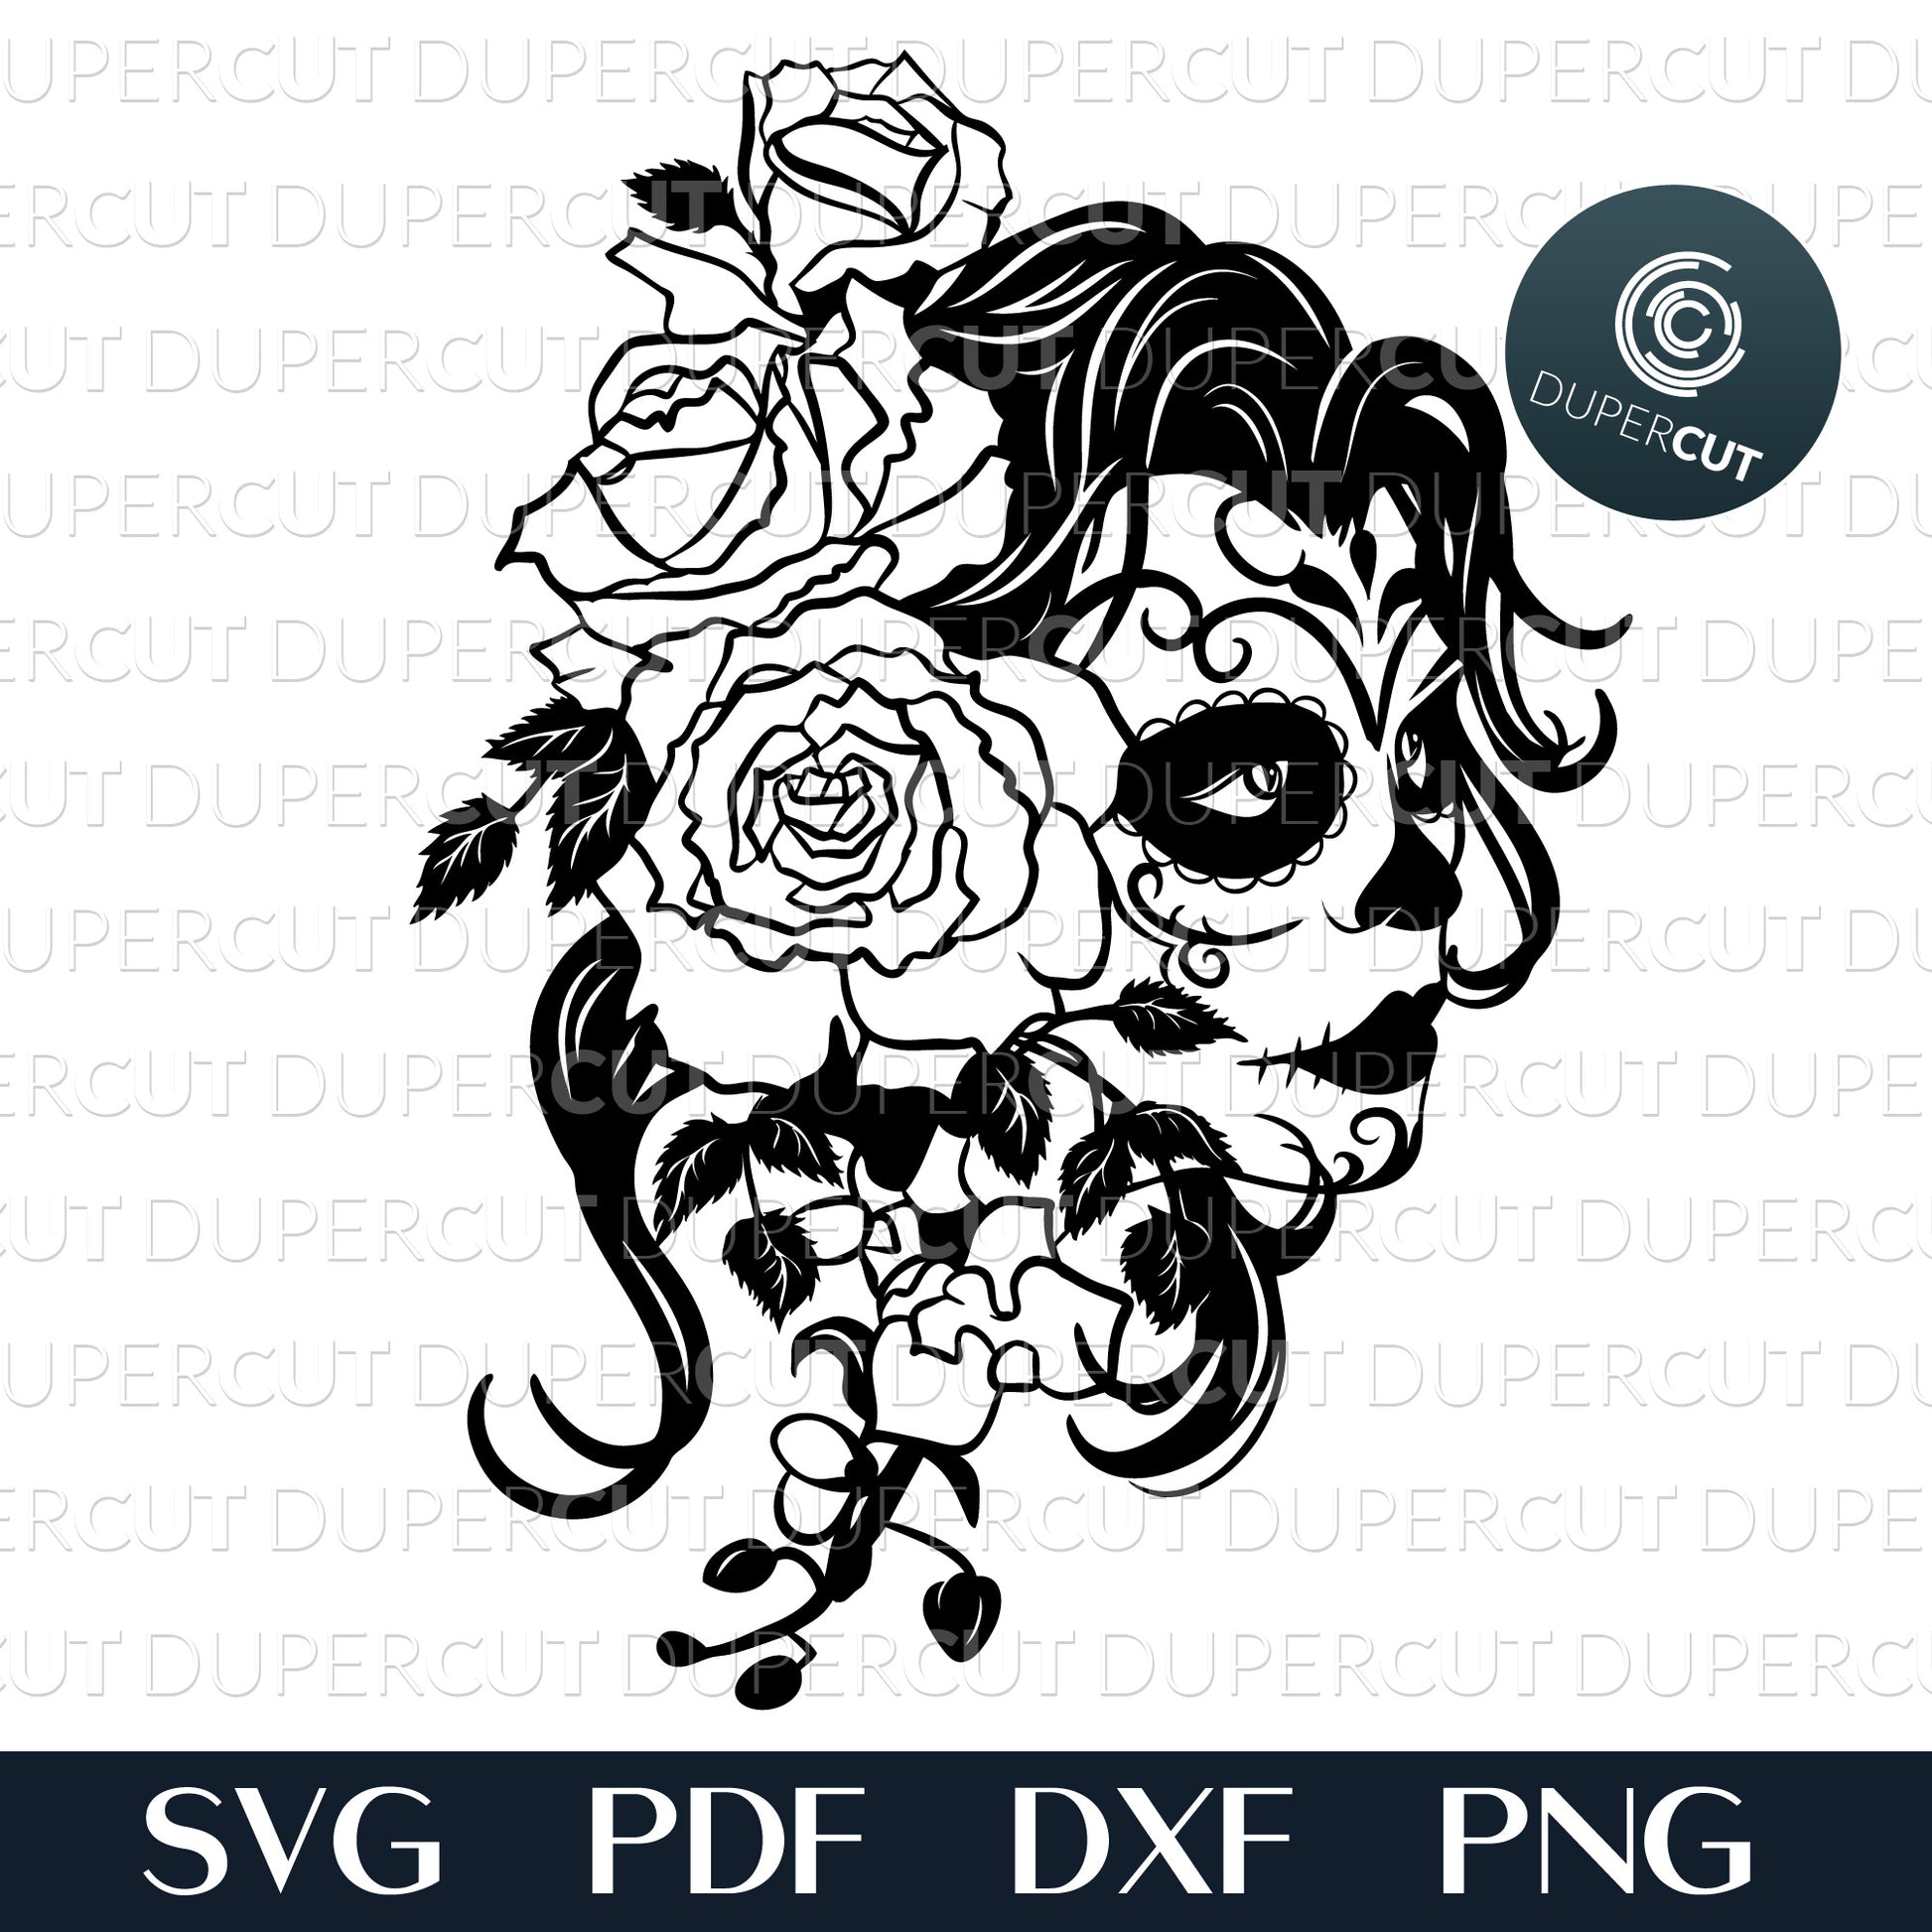 Paper cutting template - Sugar Skull Girl with Roses,  steampunk skull SVG PNG DXF cutting files for Cricut, Glowforge, Silhouette cameo, laser engraving